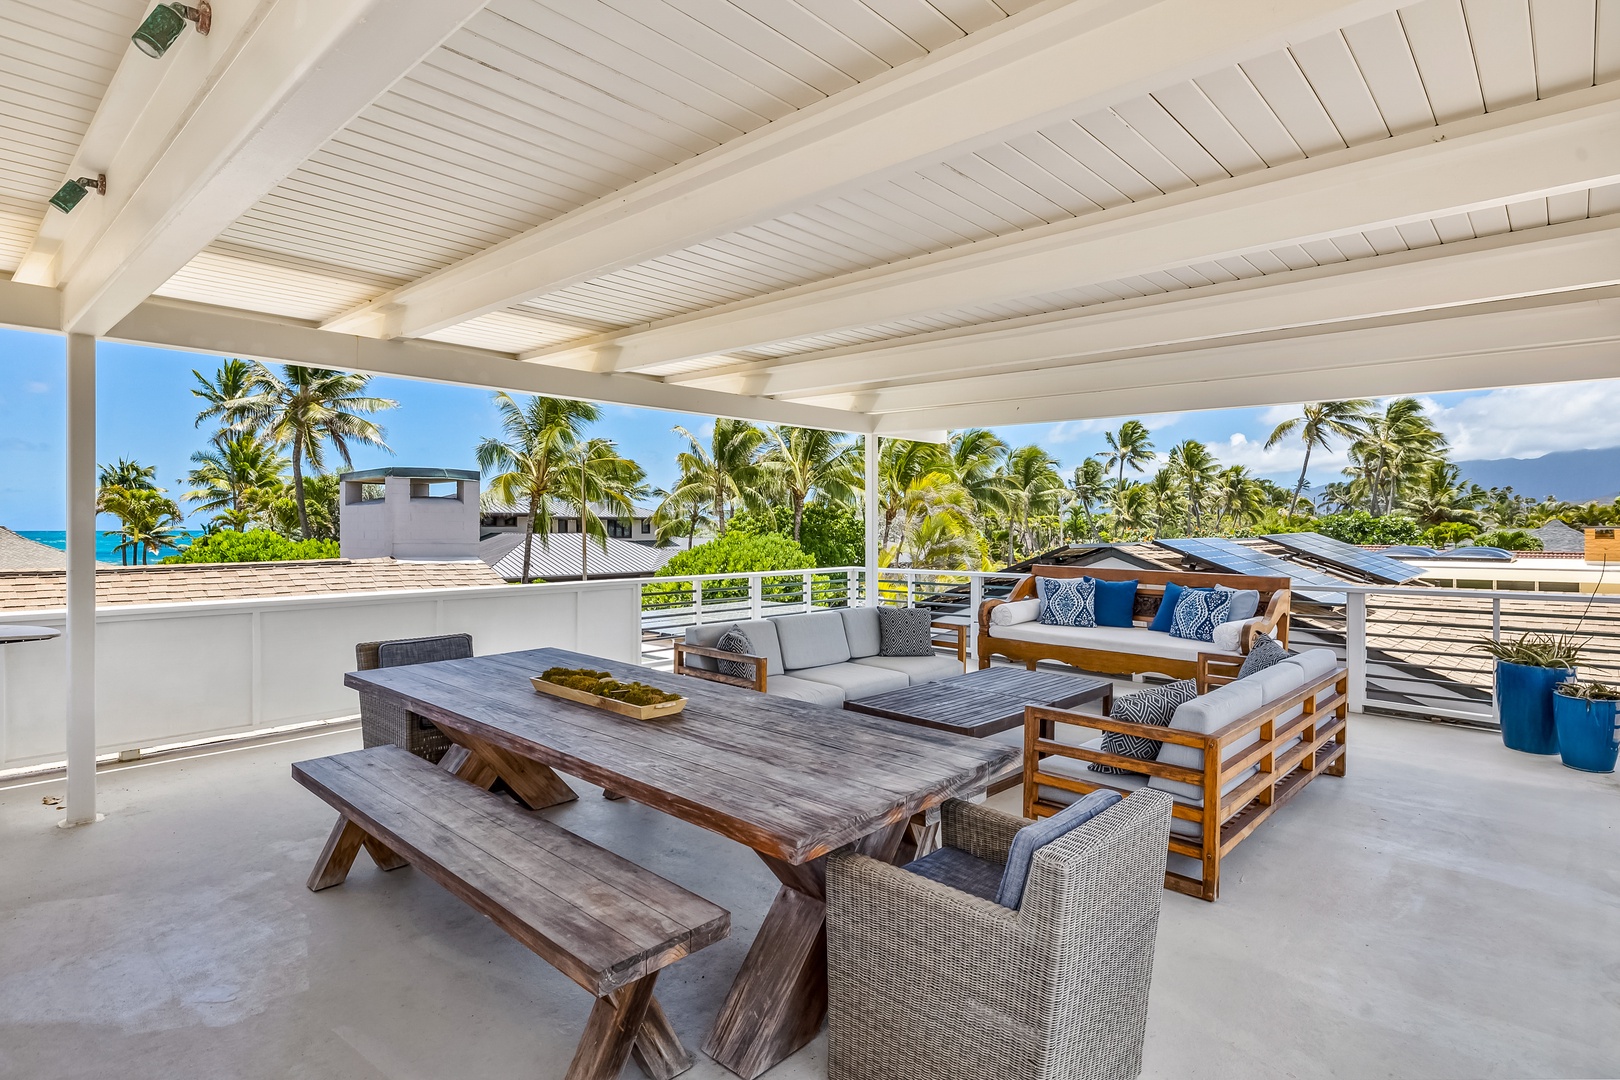 Kailua Vacation Rentals, Hale Ohana - There's ample seating up here as well as a dining table